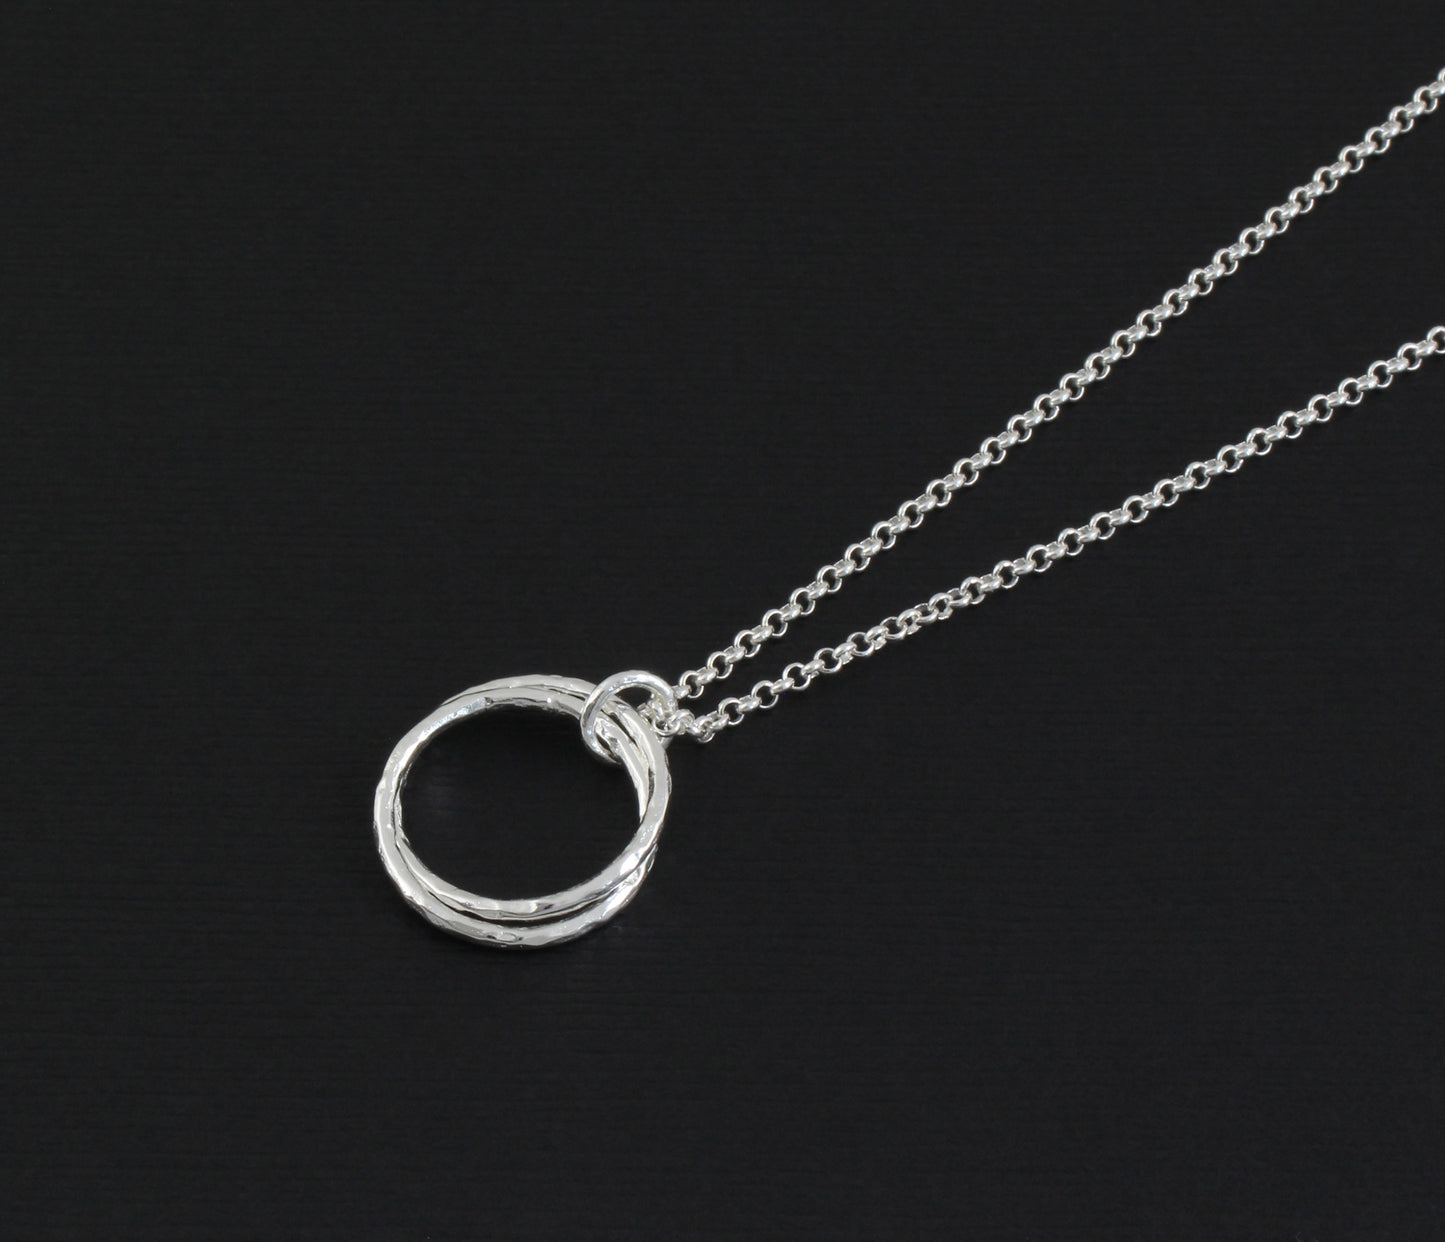 Mother and Daughter Gift - The Love Between Last Forever - Hammered Linked Infinity Ring Necklace